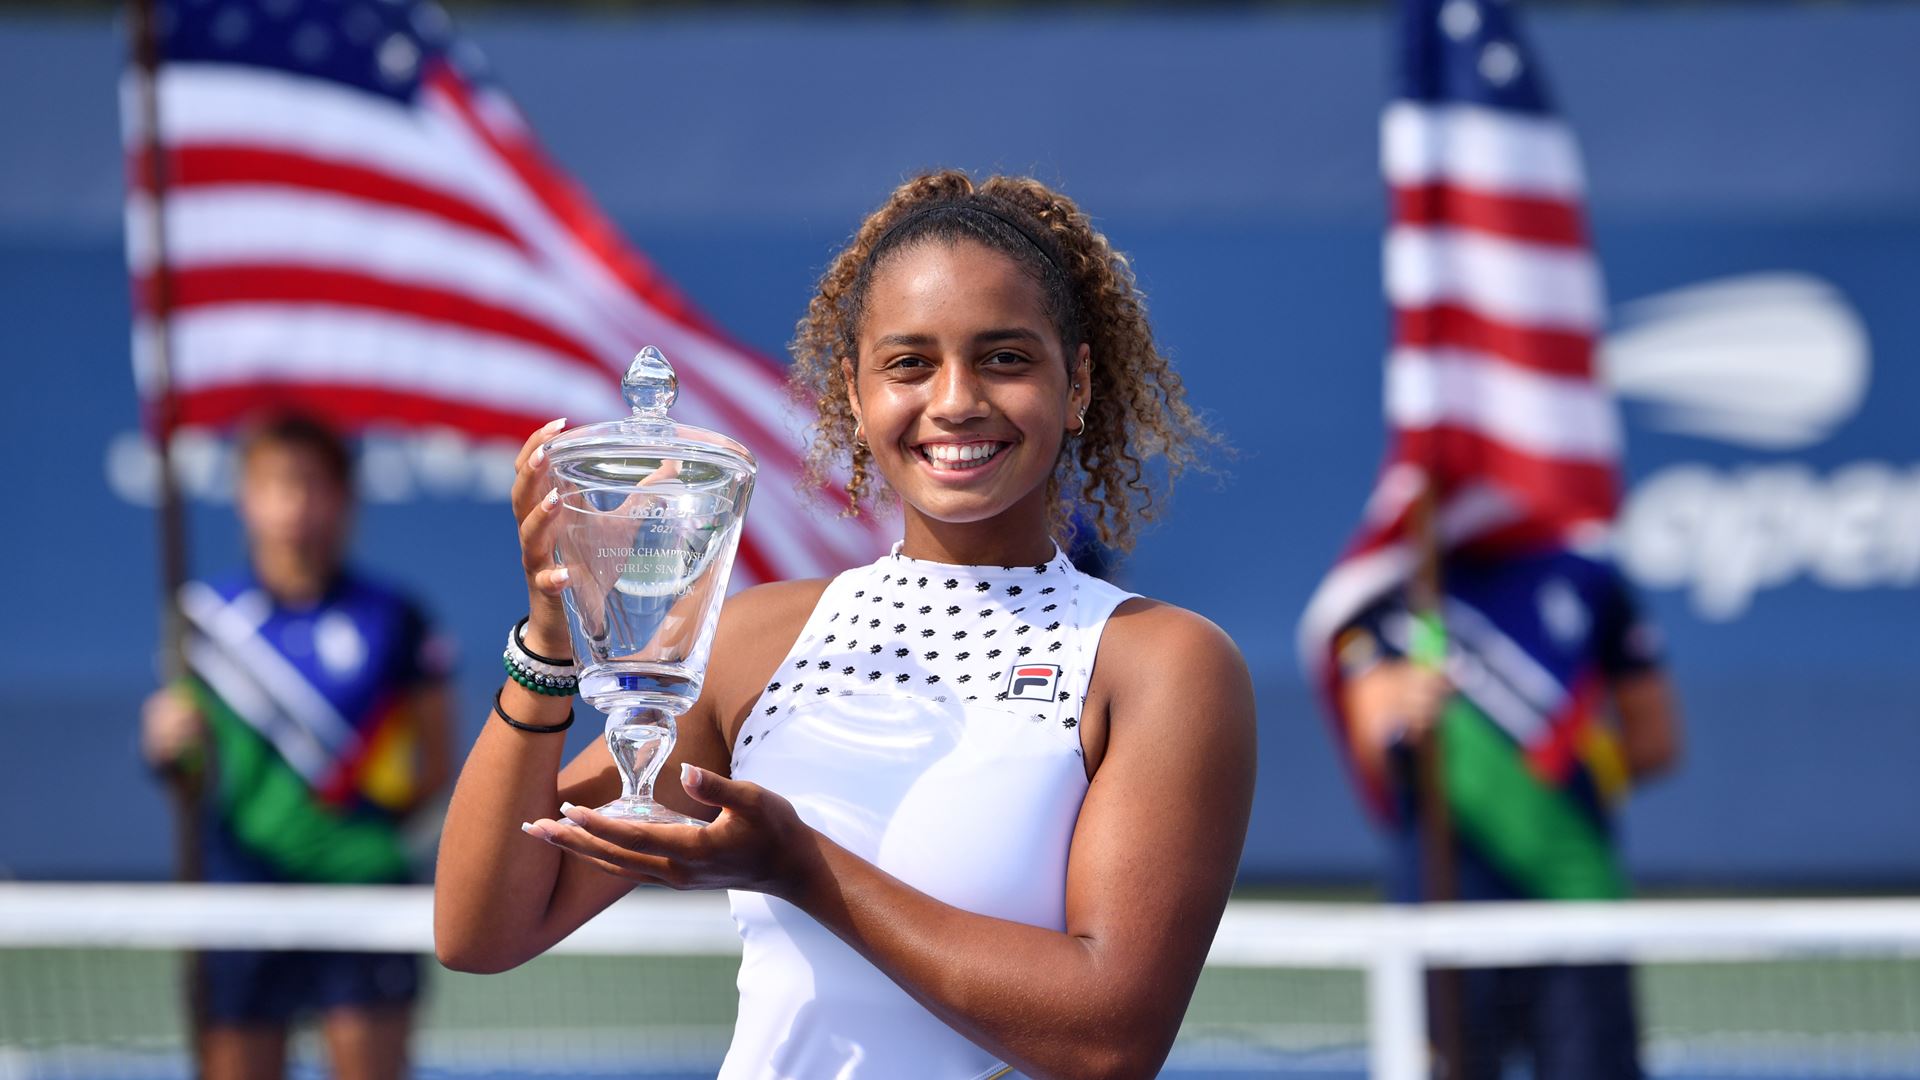 FILA Sponsored Athlete Robin Montgomery Takes Home US Open Girls’ Junior Singles and Doubles Titles